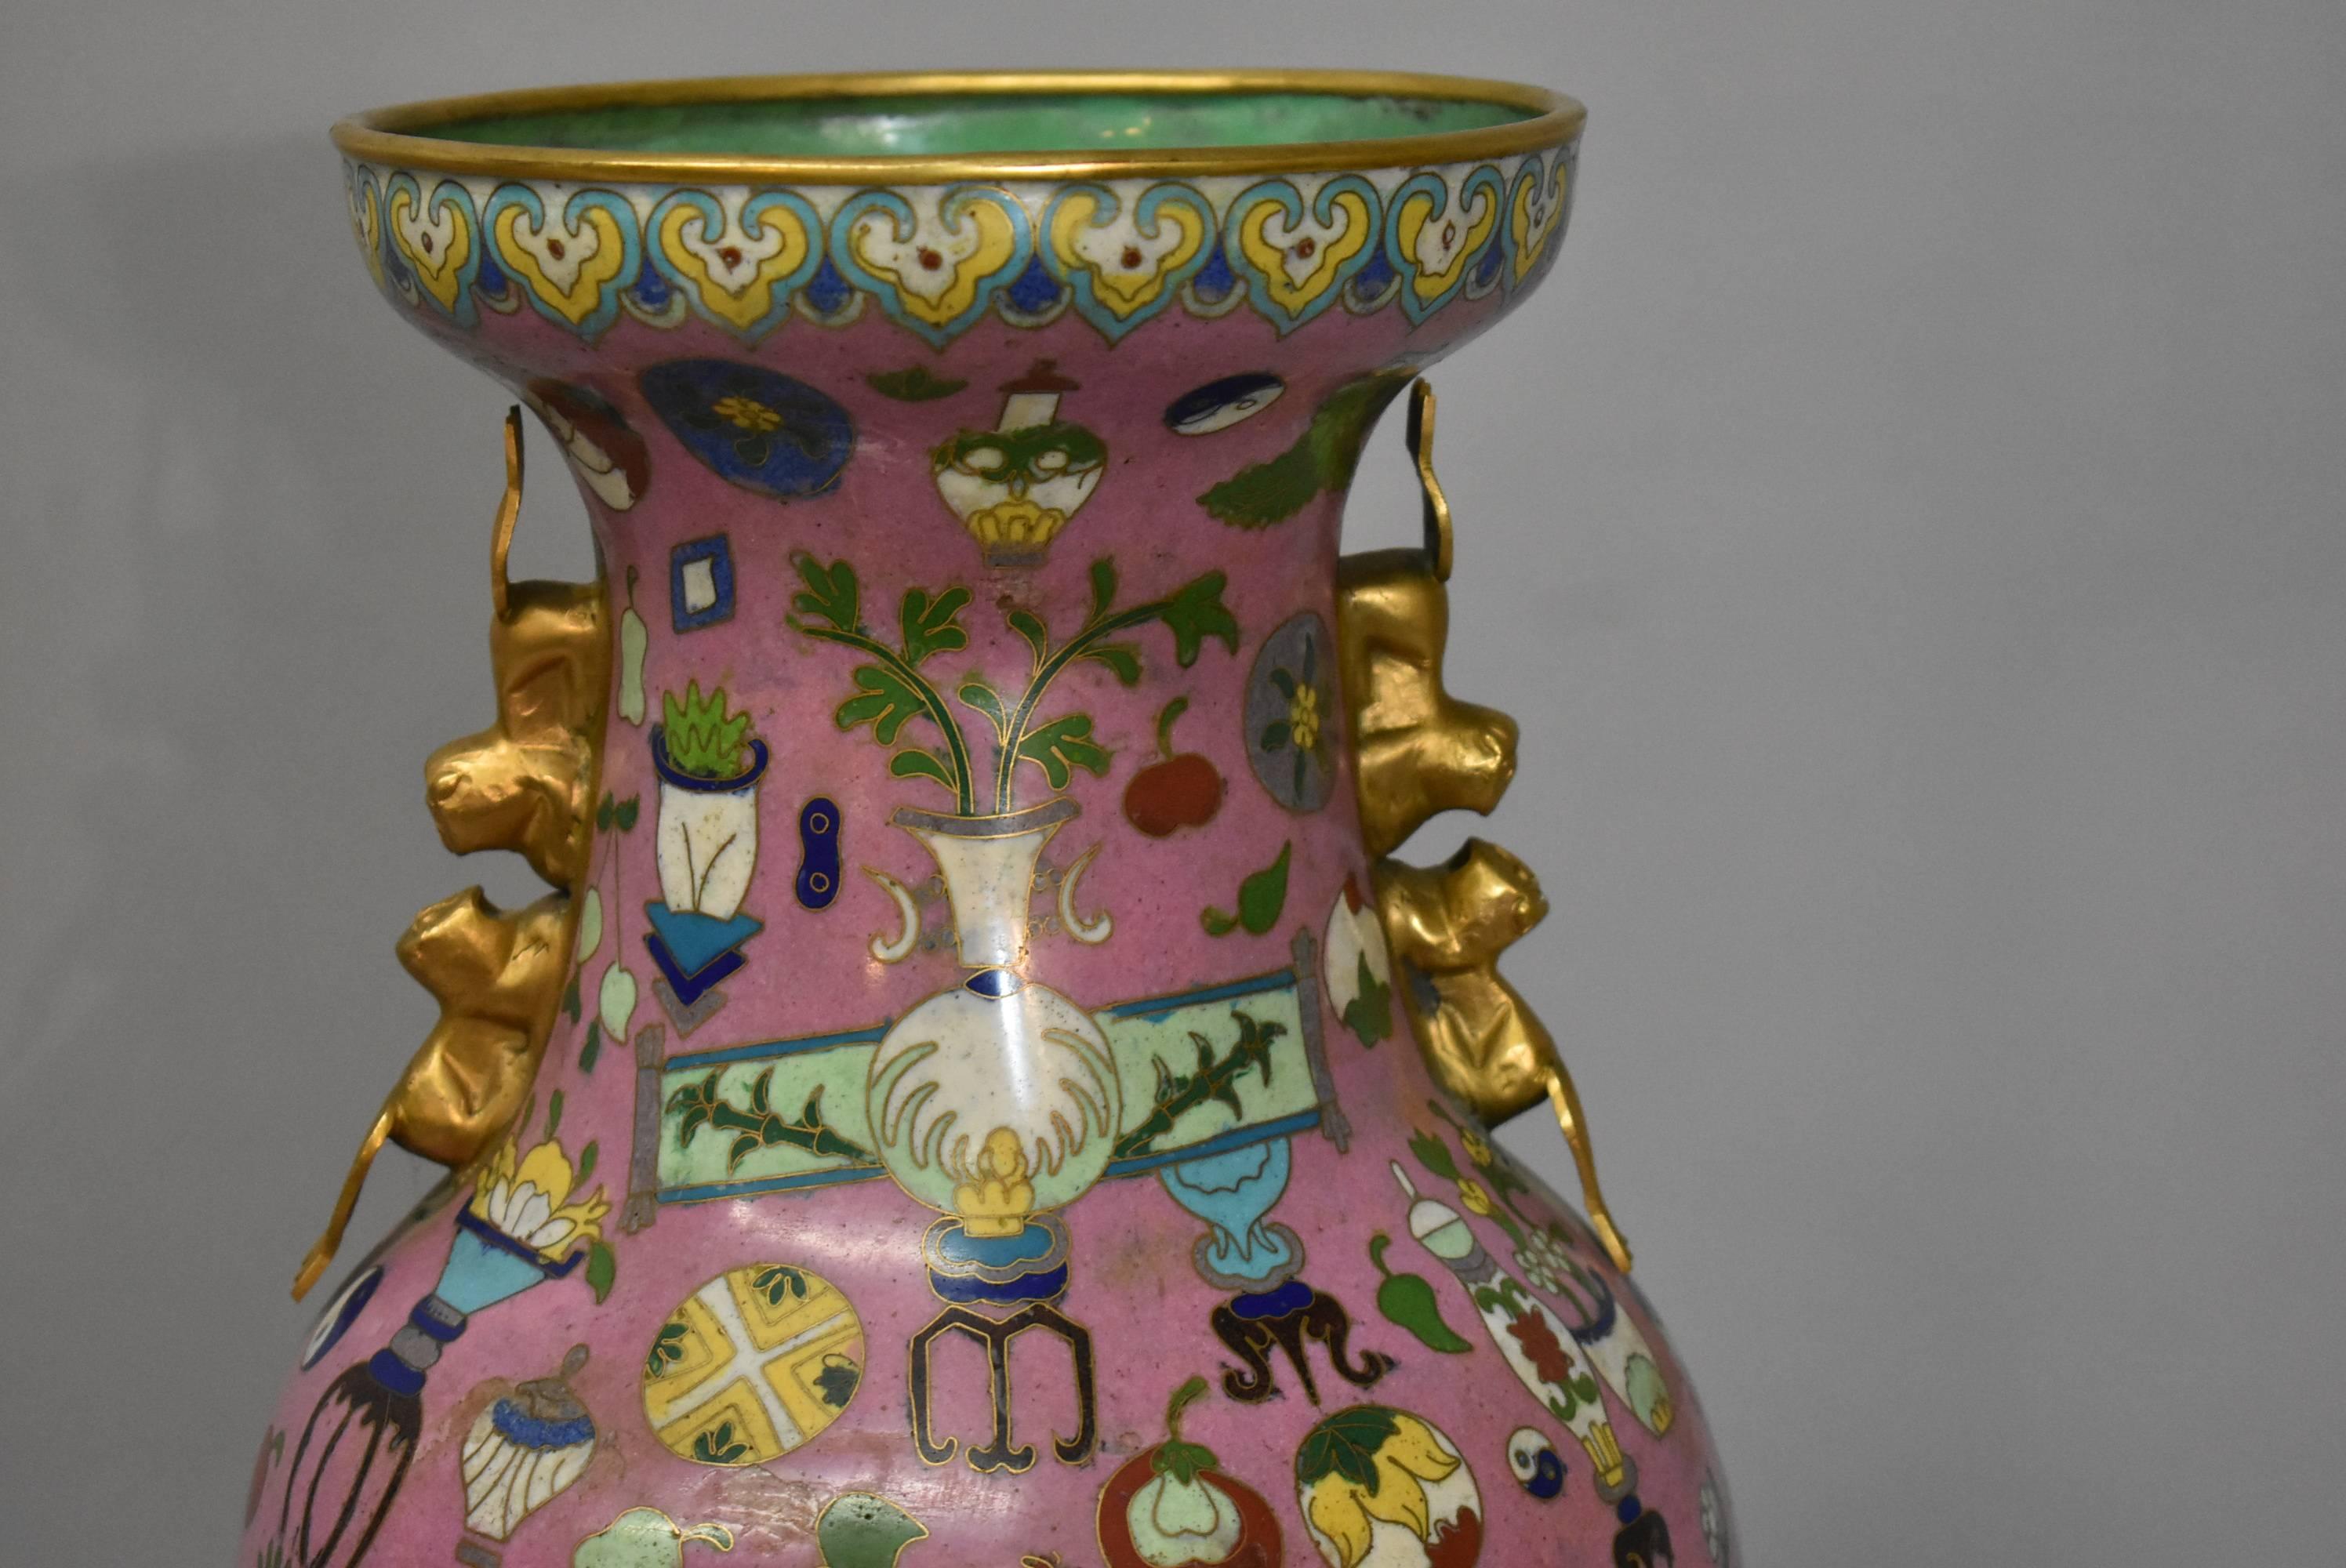 Qing Pair of Cloisonné Vases in the Hundred Treasures Pattern with Brass Handles